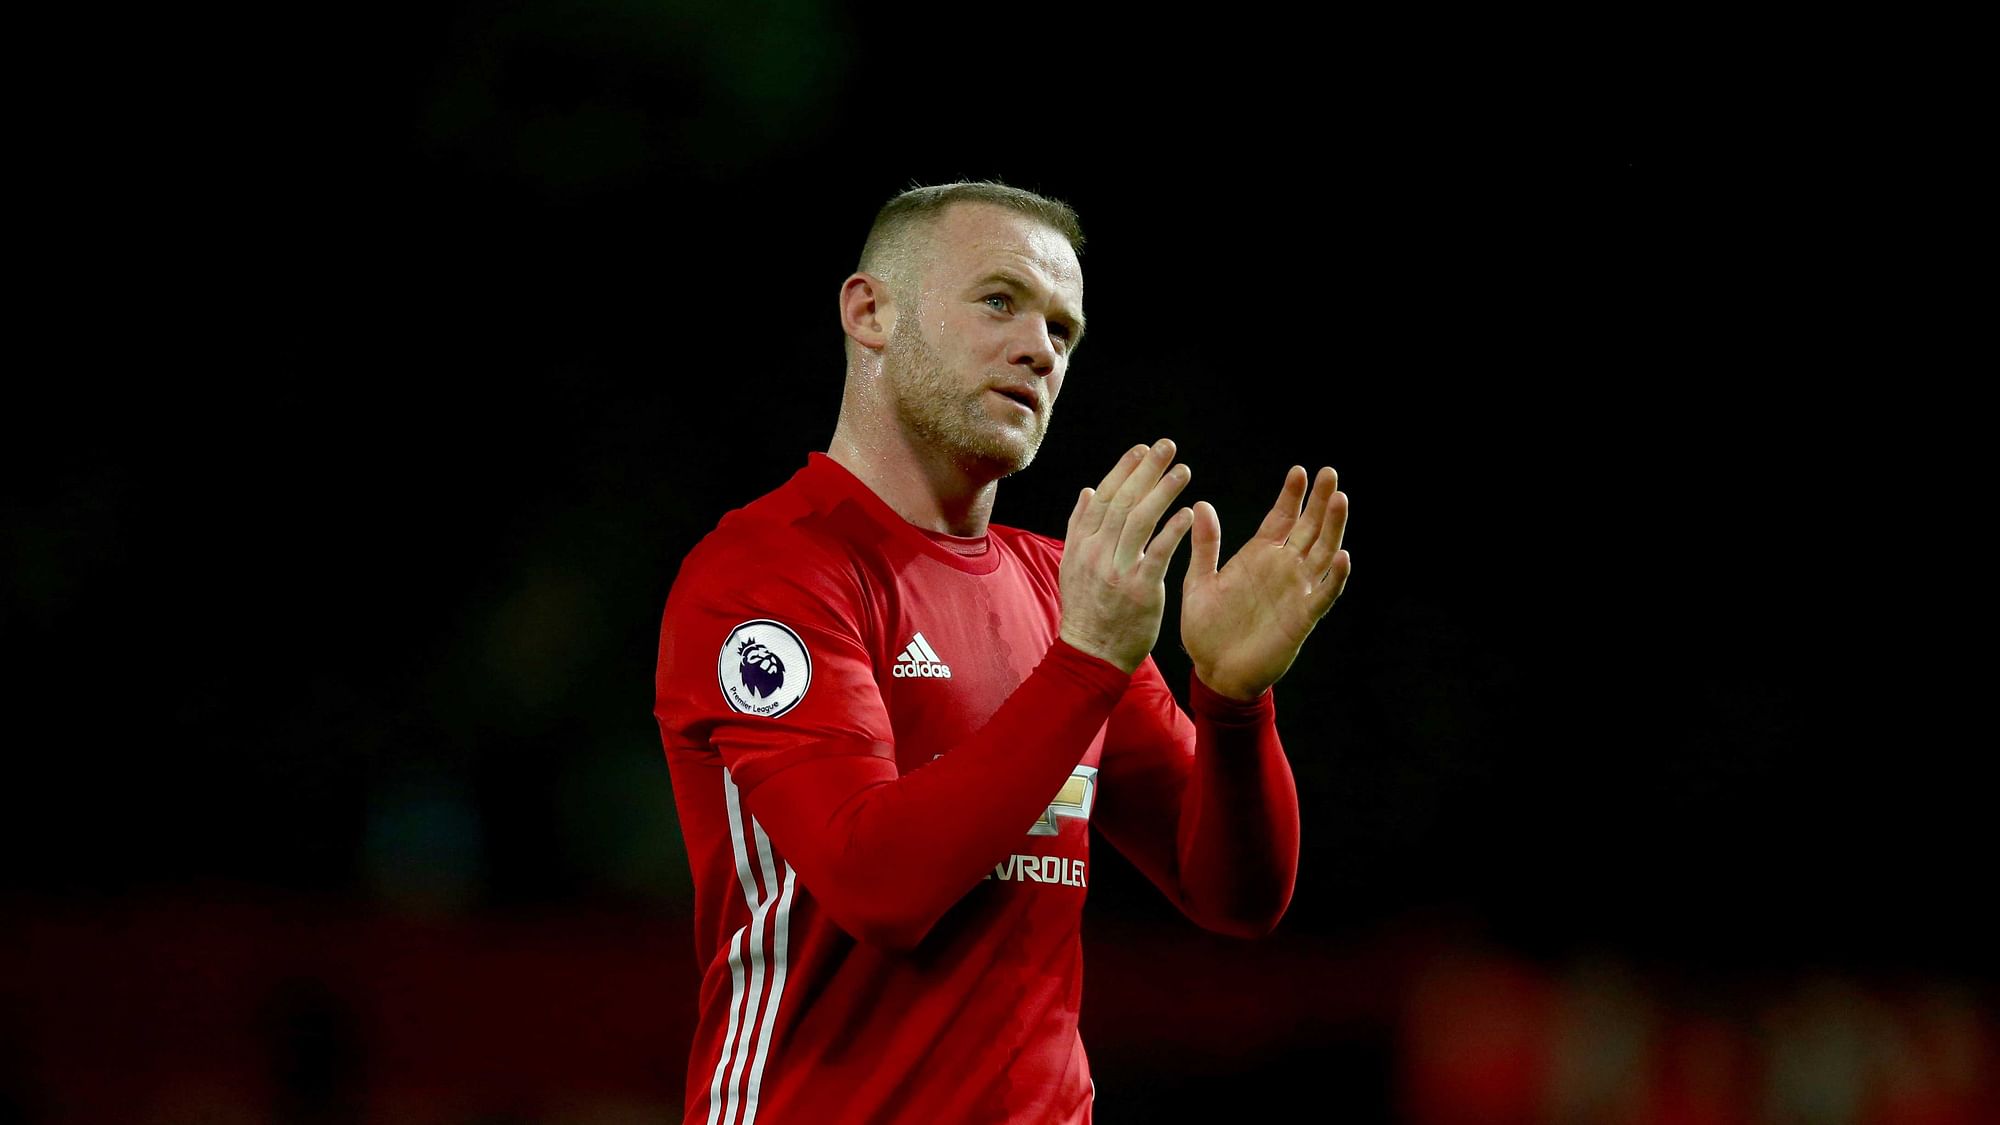 Wayne Rooney Departs Man United After 13 Years, Joins Everton